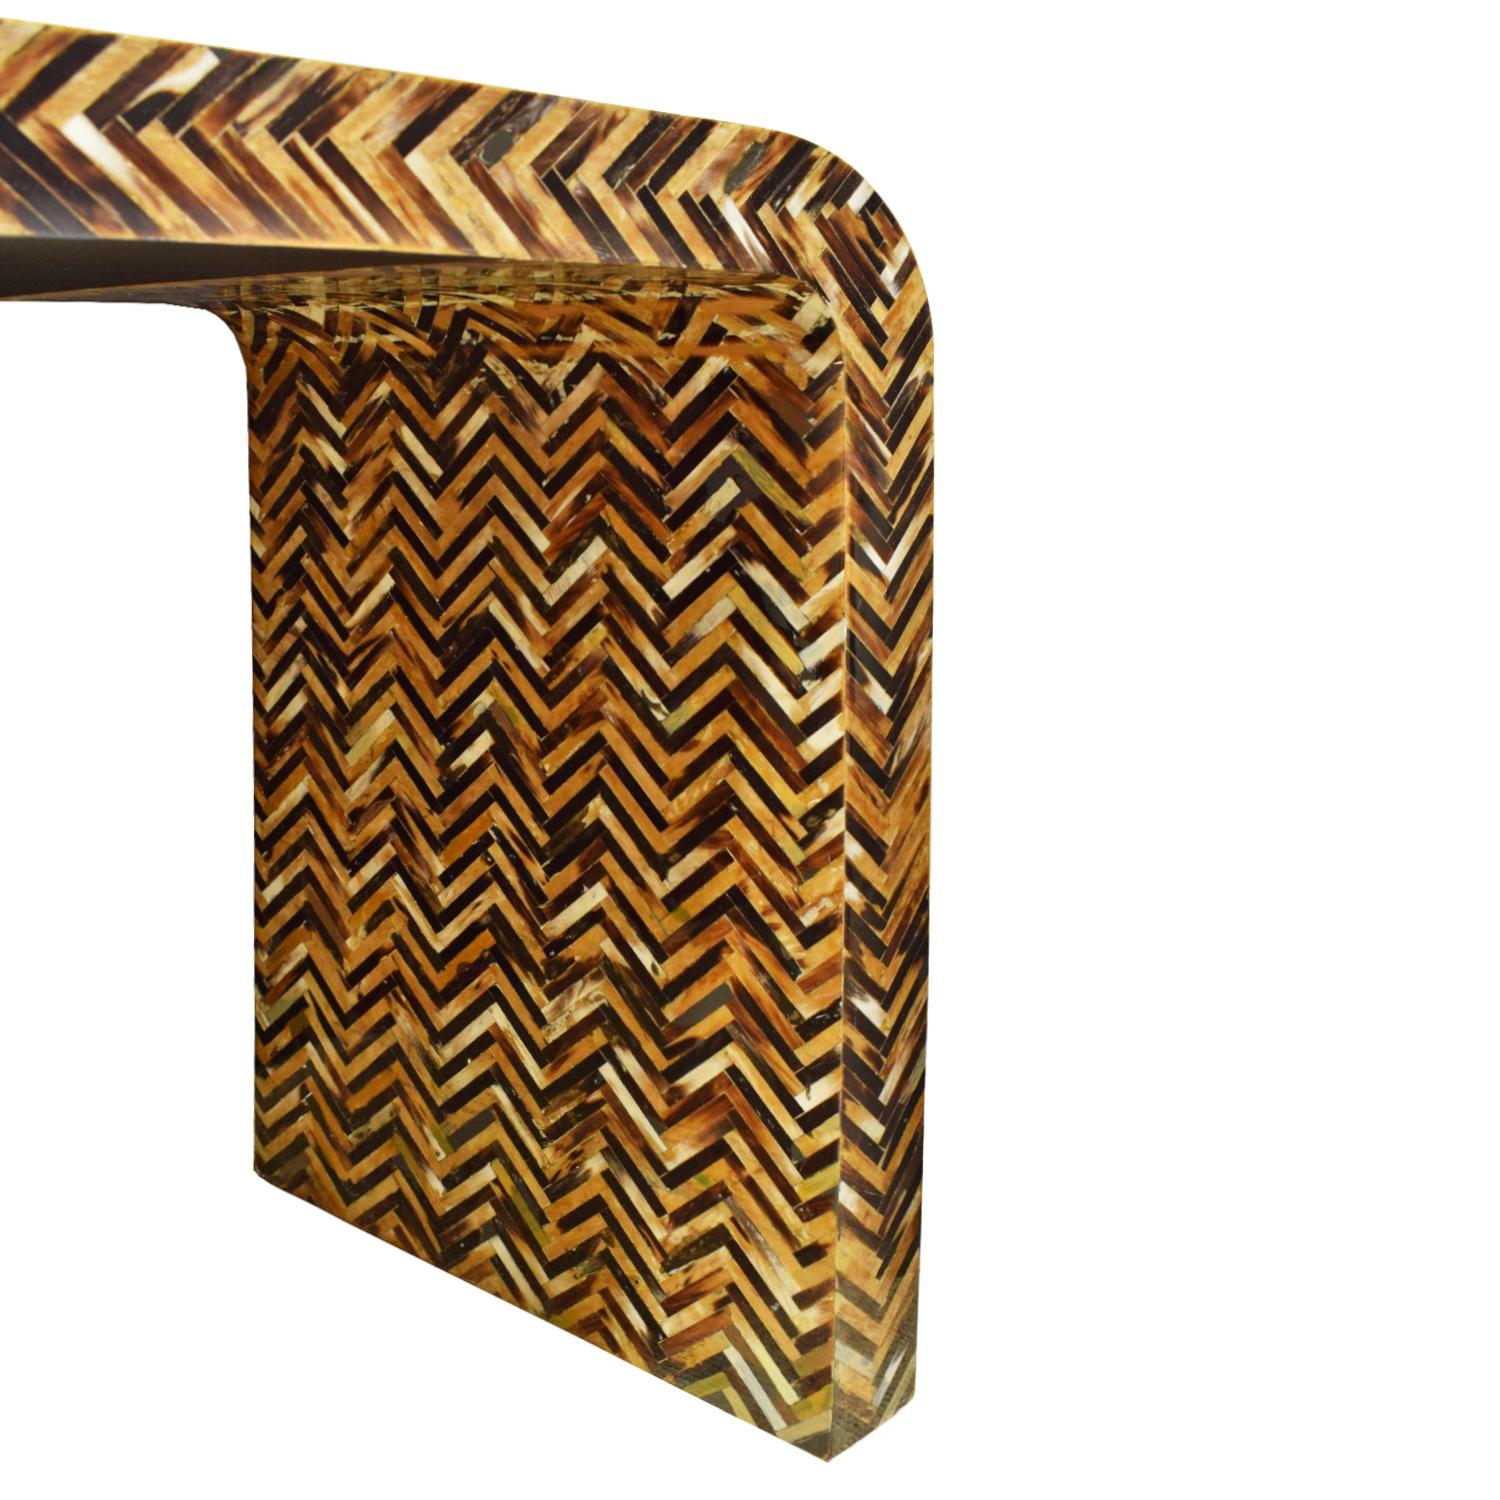 American Karl Springer Waterfall Console Table in Lacquered Tessellated Horn, 1970s